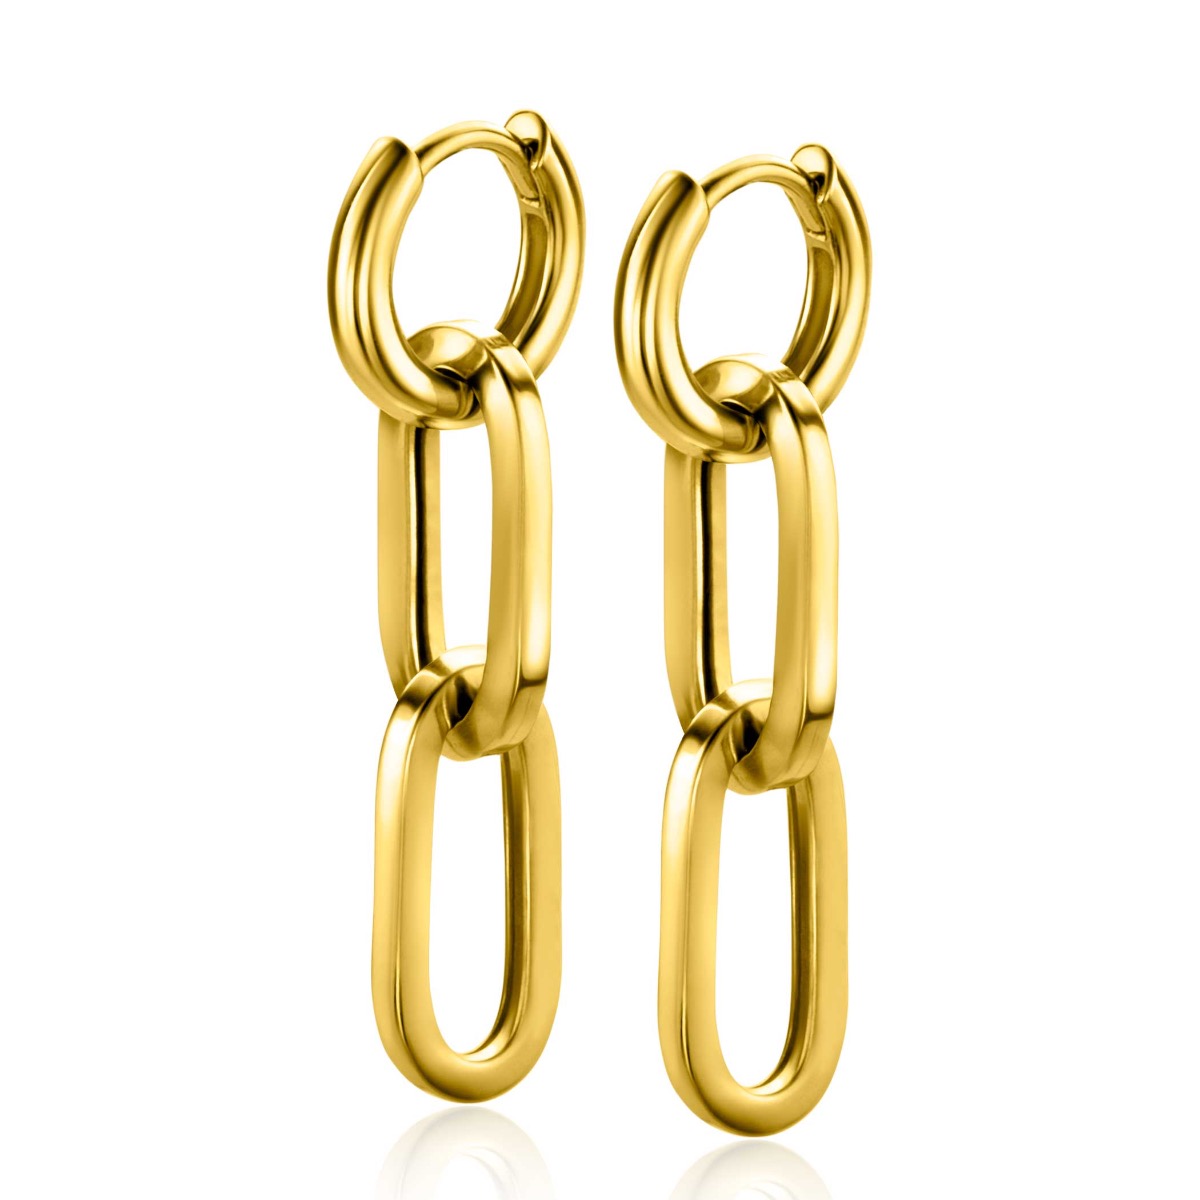 37mm ZINZI Gold Plated Sterling Silver Earrings Pendants 2 Long Paperclip Chains ZICH2352G (excl. hoop earrings)